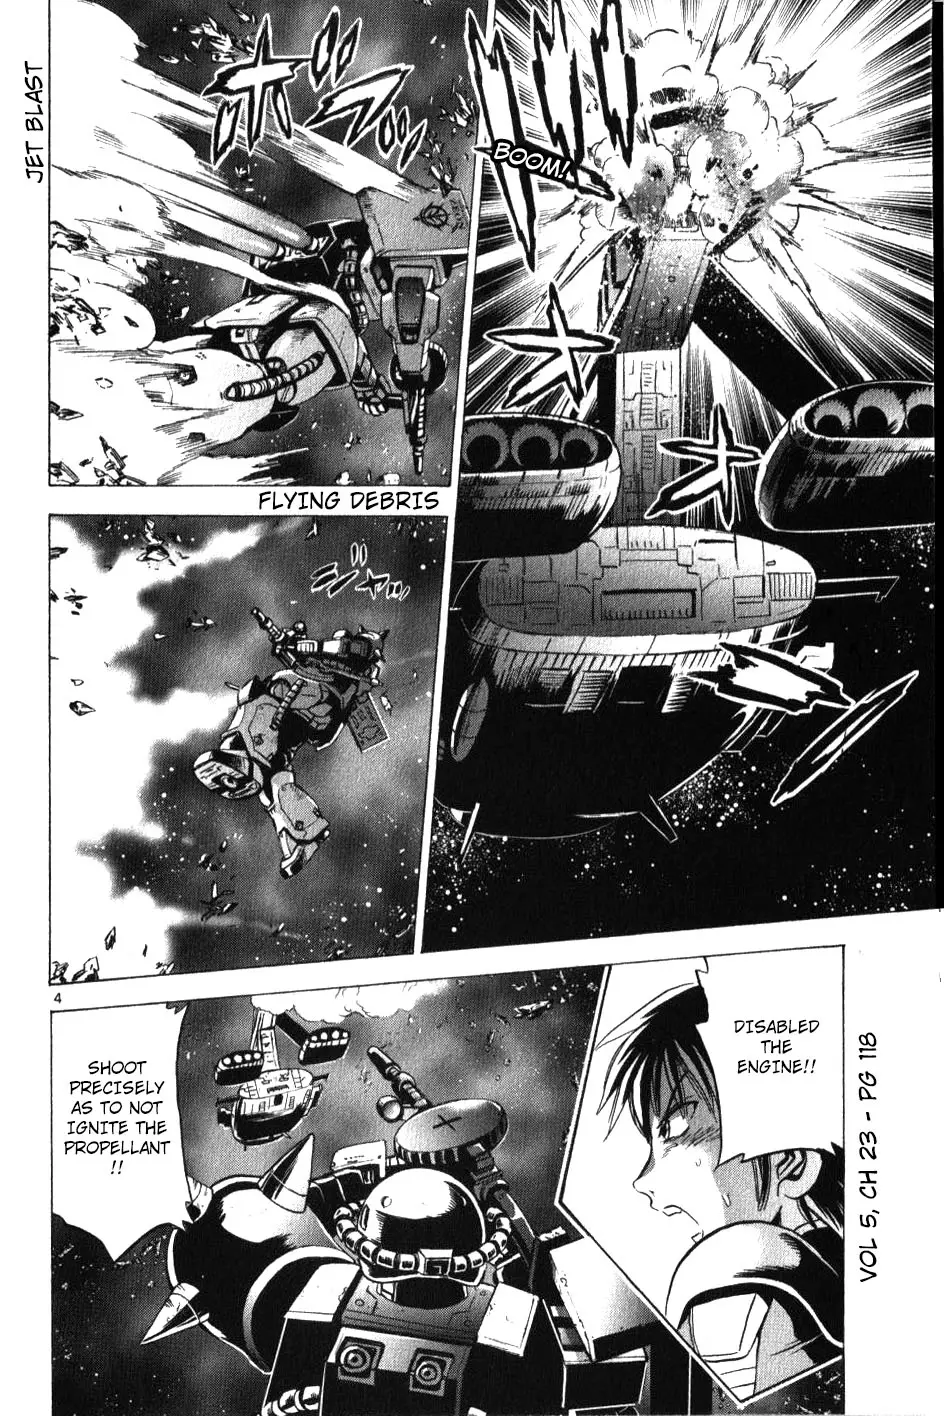 Mobile Suit Gundam Aggressor - 23 page 4-82a99f00